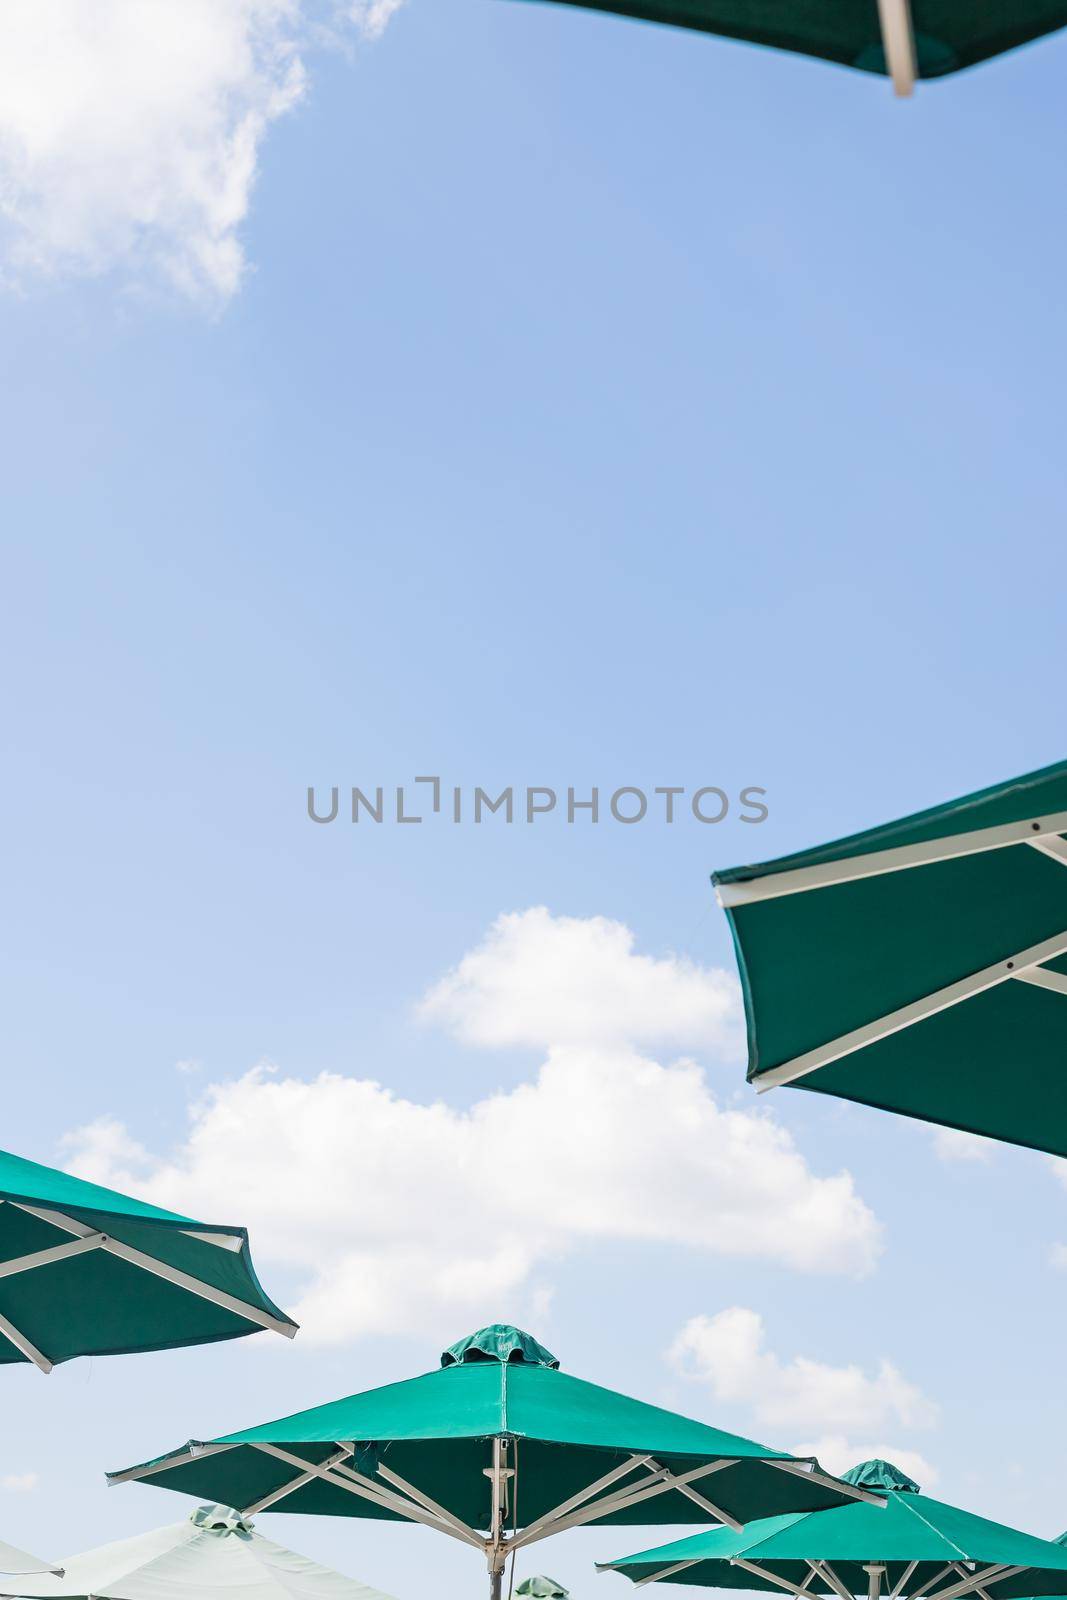 Several yellow umbrellas on the beach against blue sky with clouds in the summer